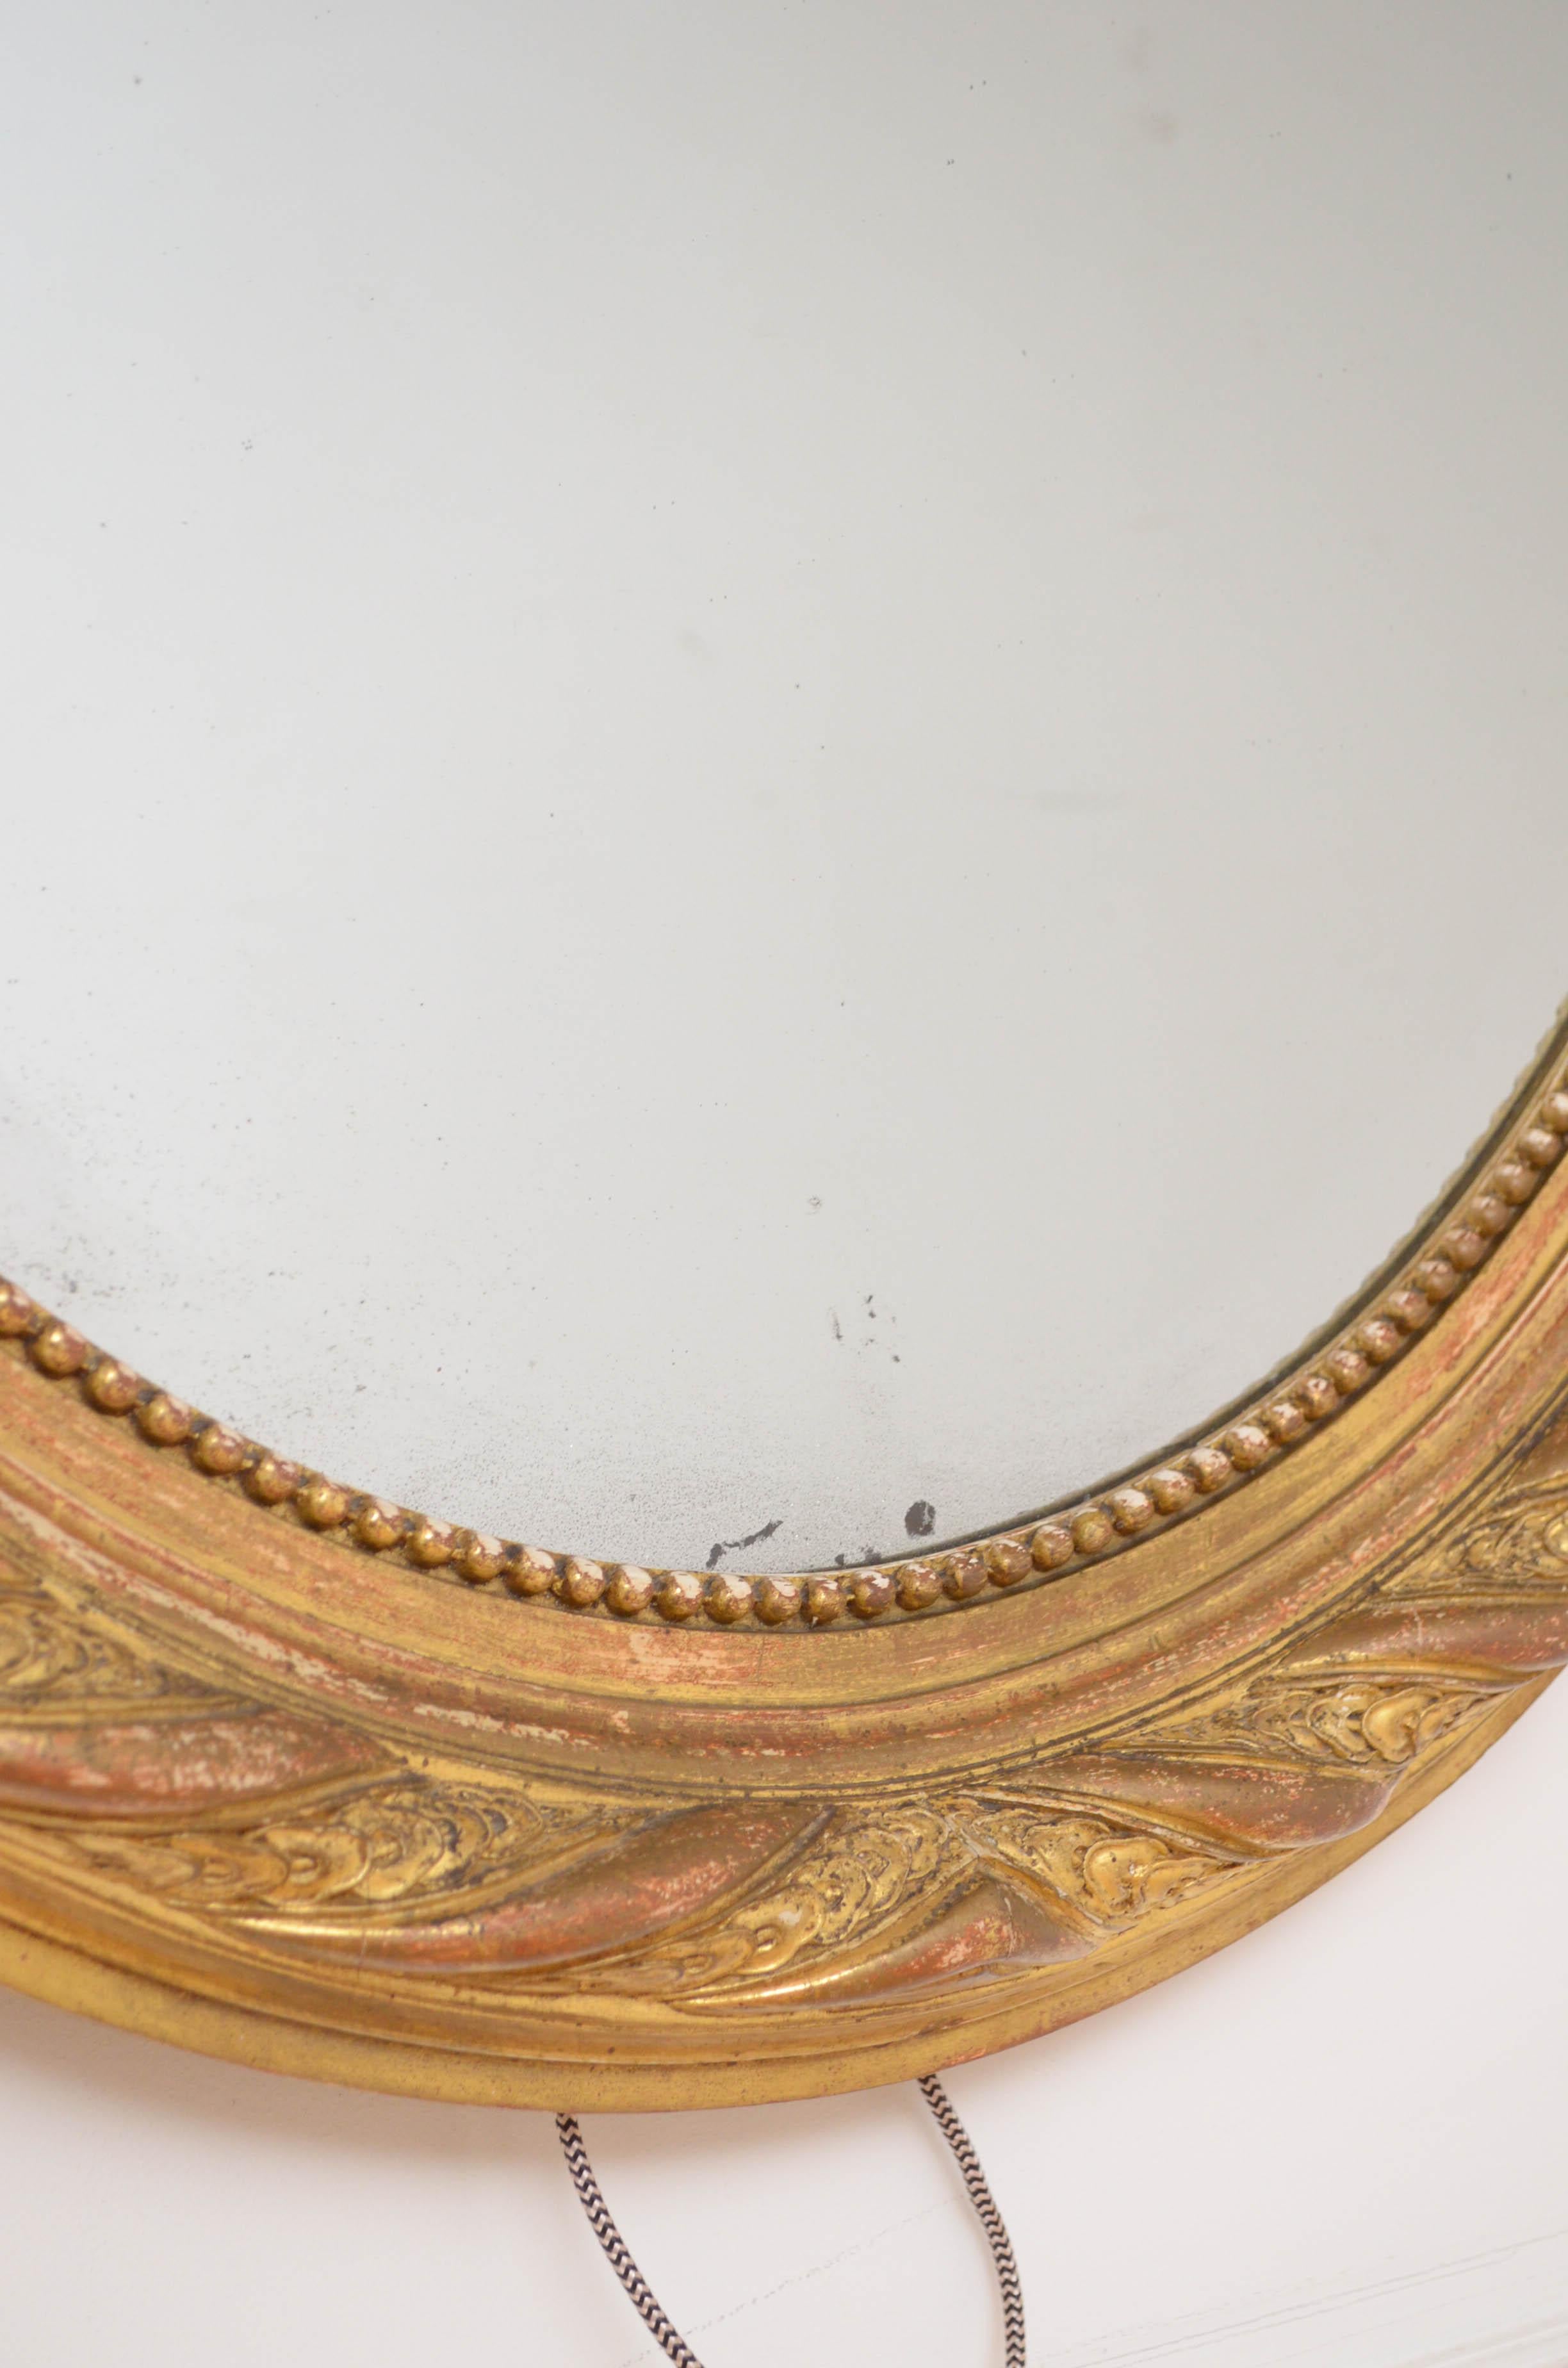 Fine 19th Century Gilded Wall Mirror For Sale 5